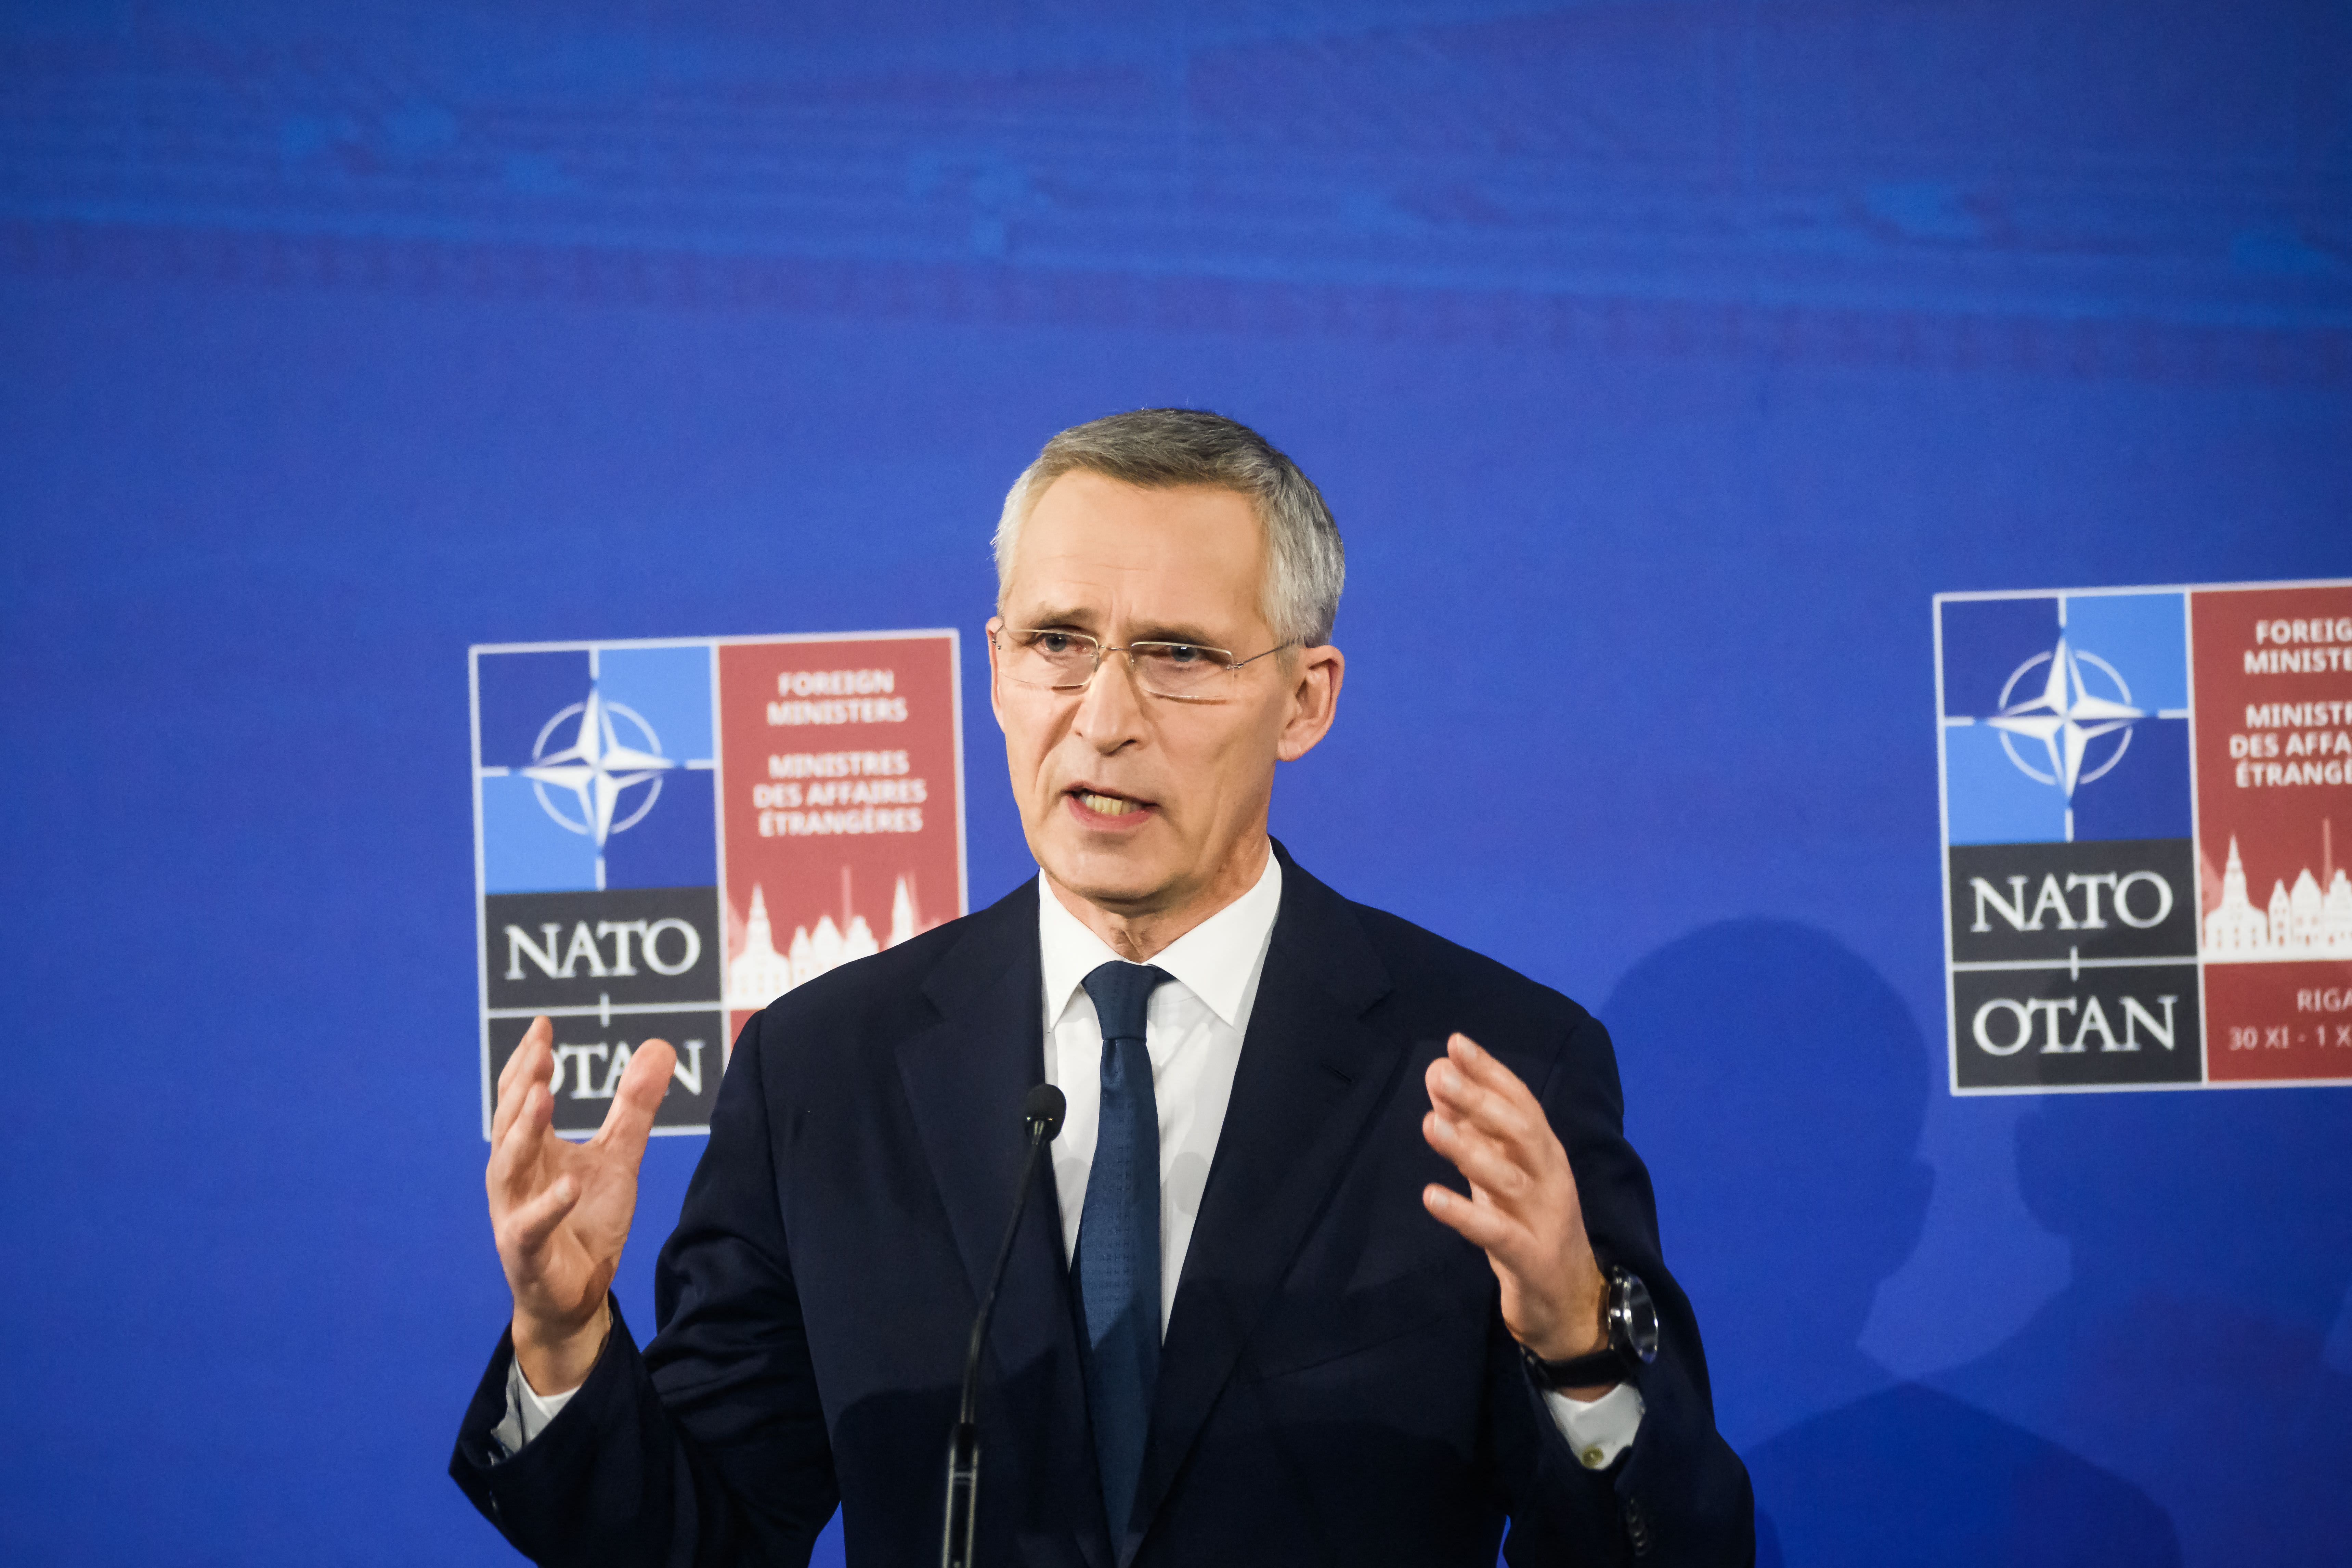 Russia is 'a power in decline' but still poses a military threat, NATO chief says